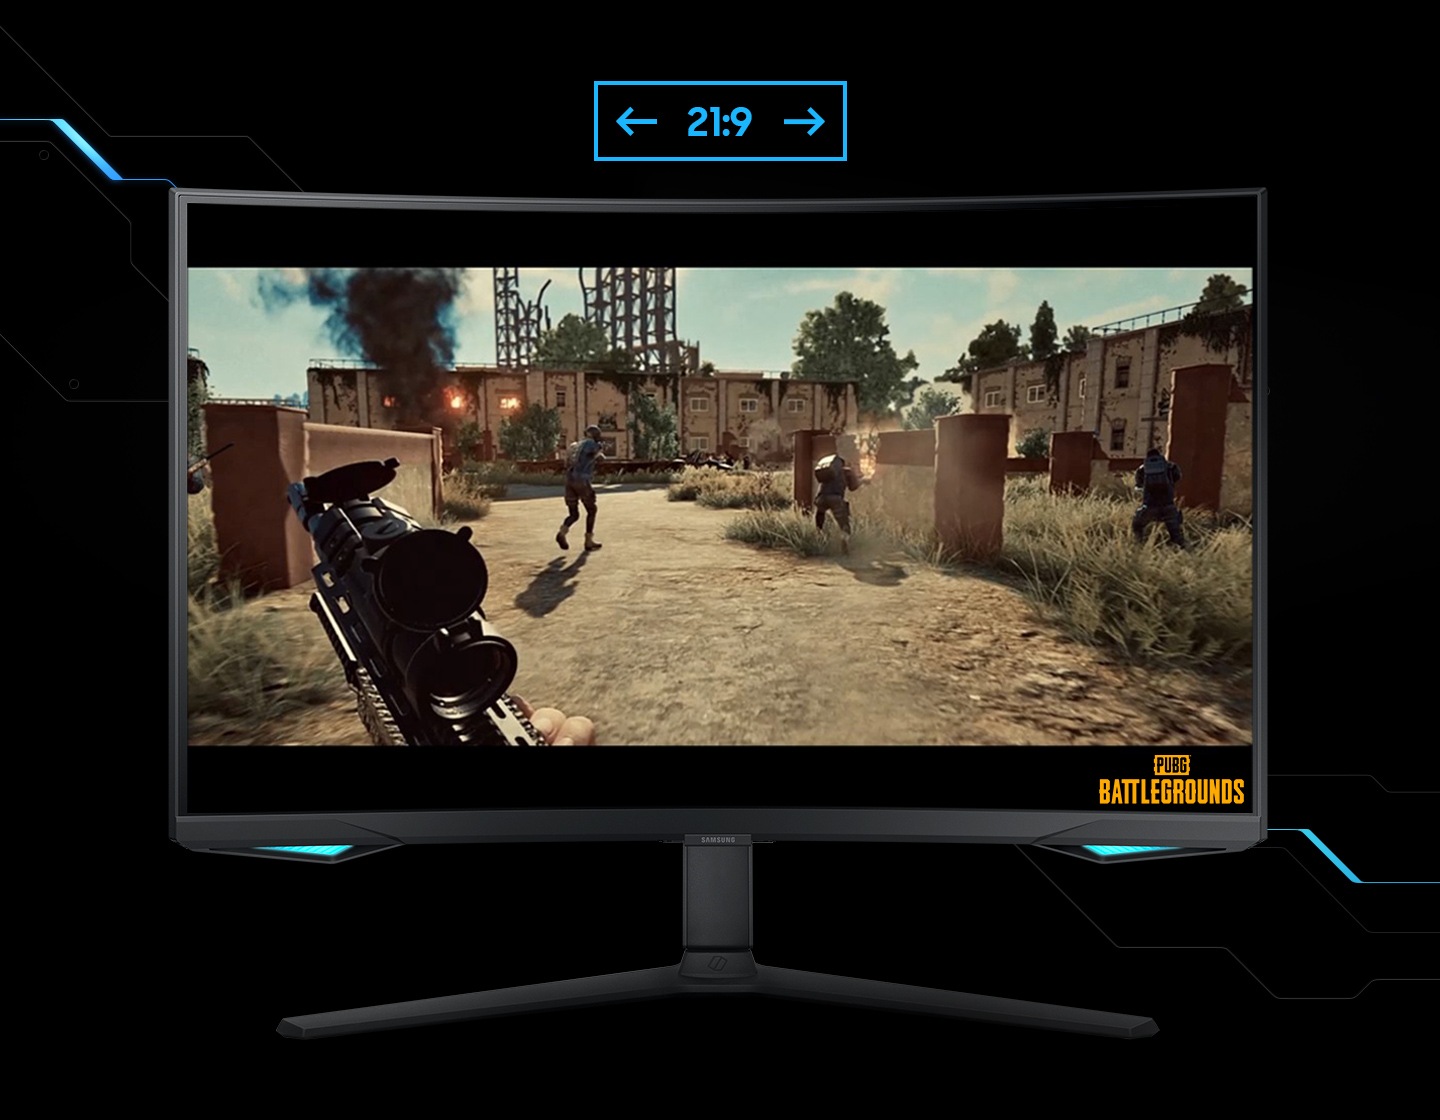 A monitor shows the viewpoint of a player within a shooting game. The player is running around a battle zone, with a machine gun. As the screen is extended from 16:9 to 21:9 proportion, an unseen enemy reveals in the left corner. &quot"Battleground&quot" logo is shown on the right lower corner of the screen.